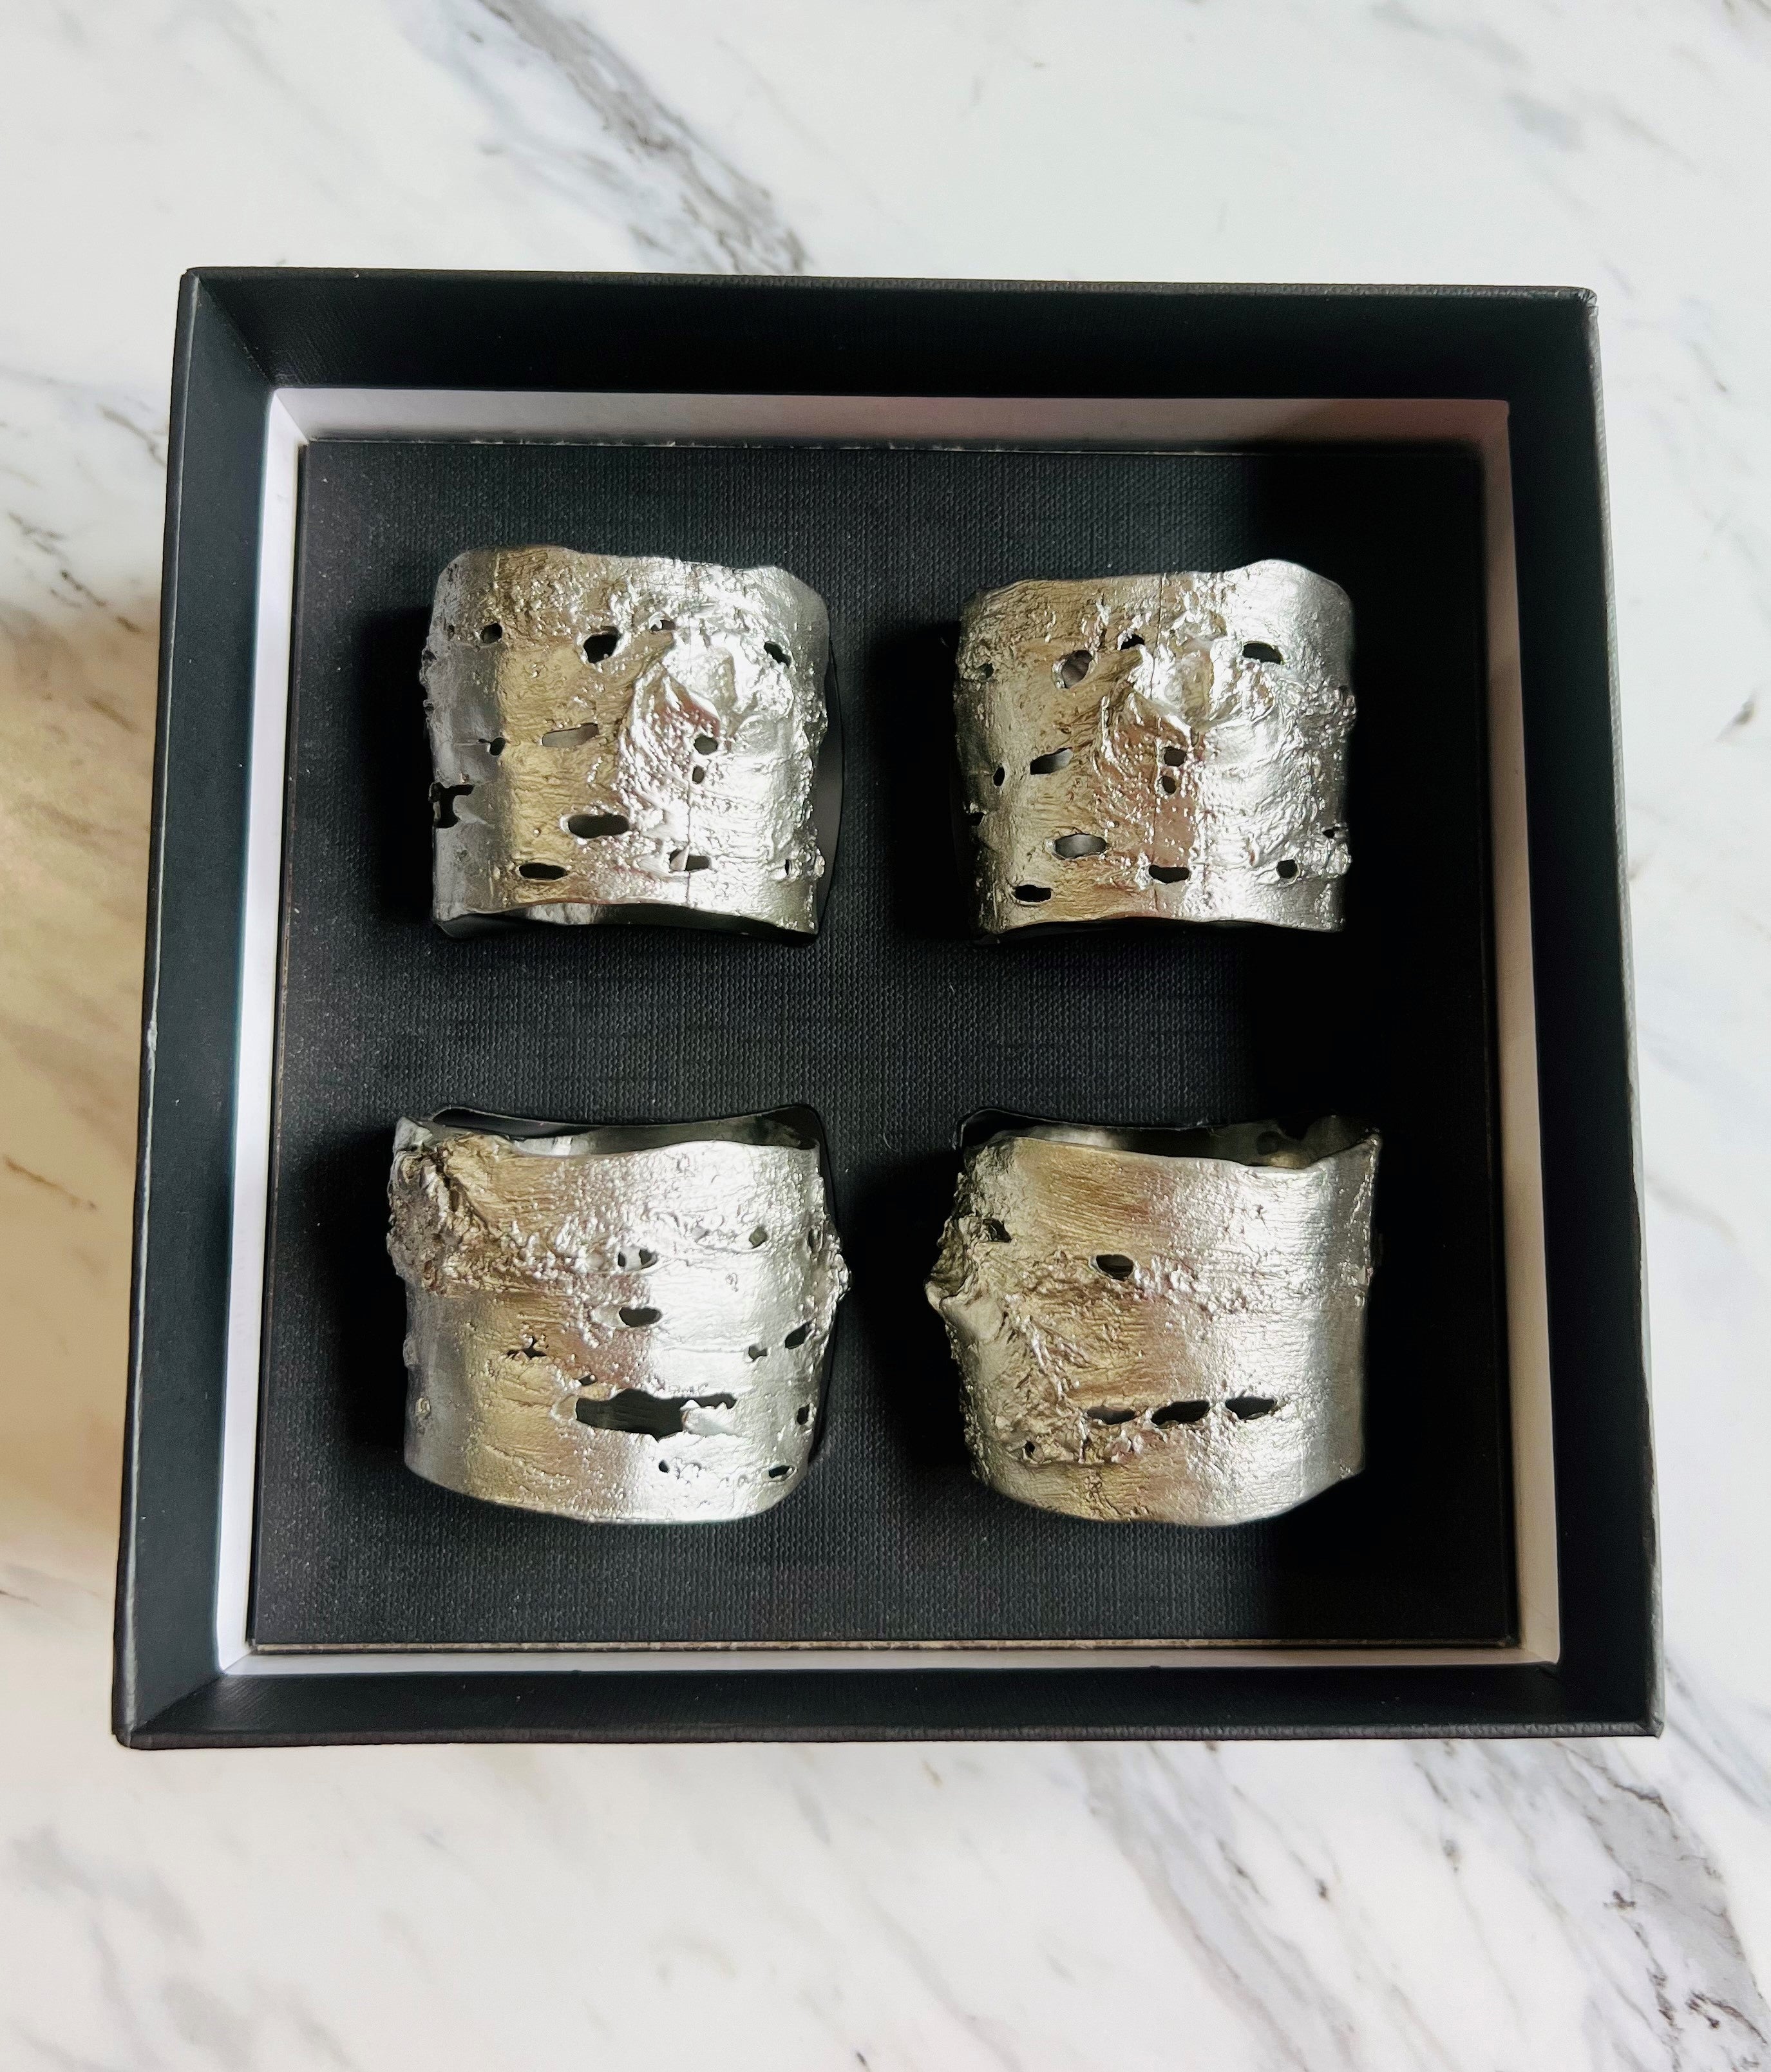 Birch Wood Napkin Rings, Unfinished for DIY Craft